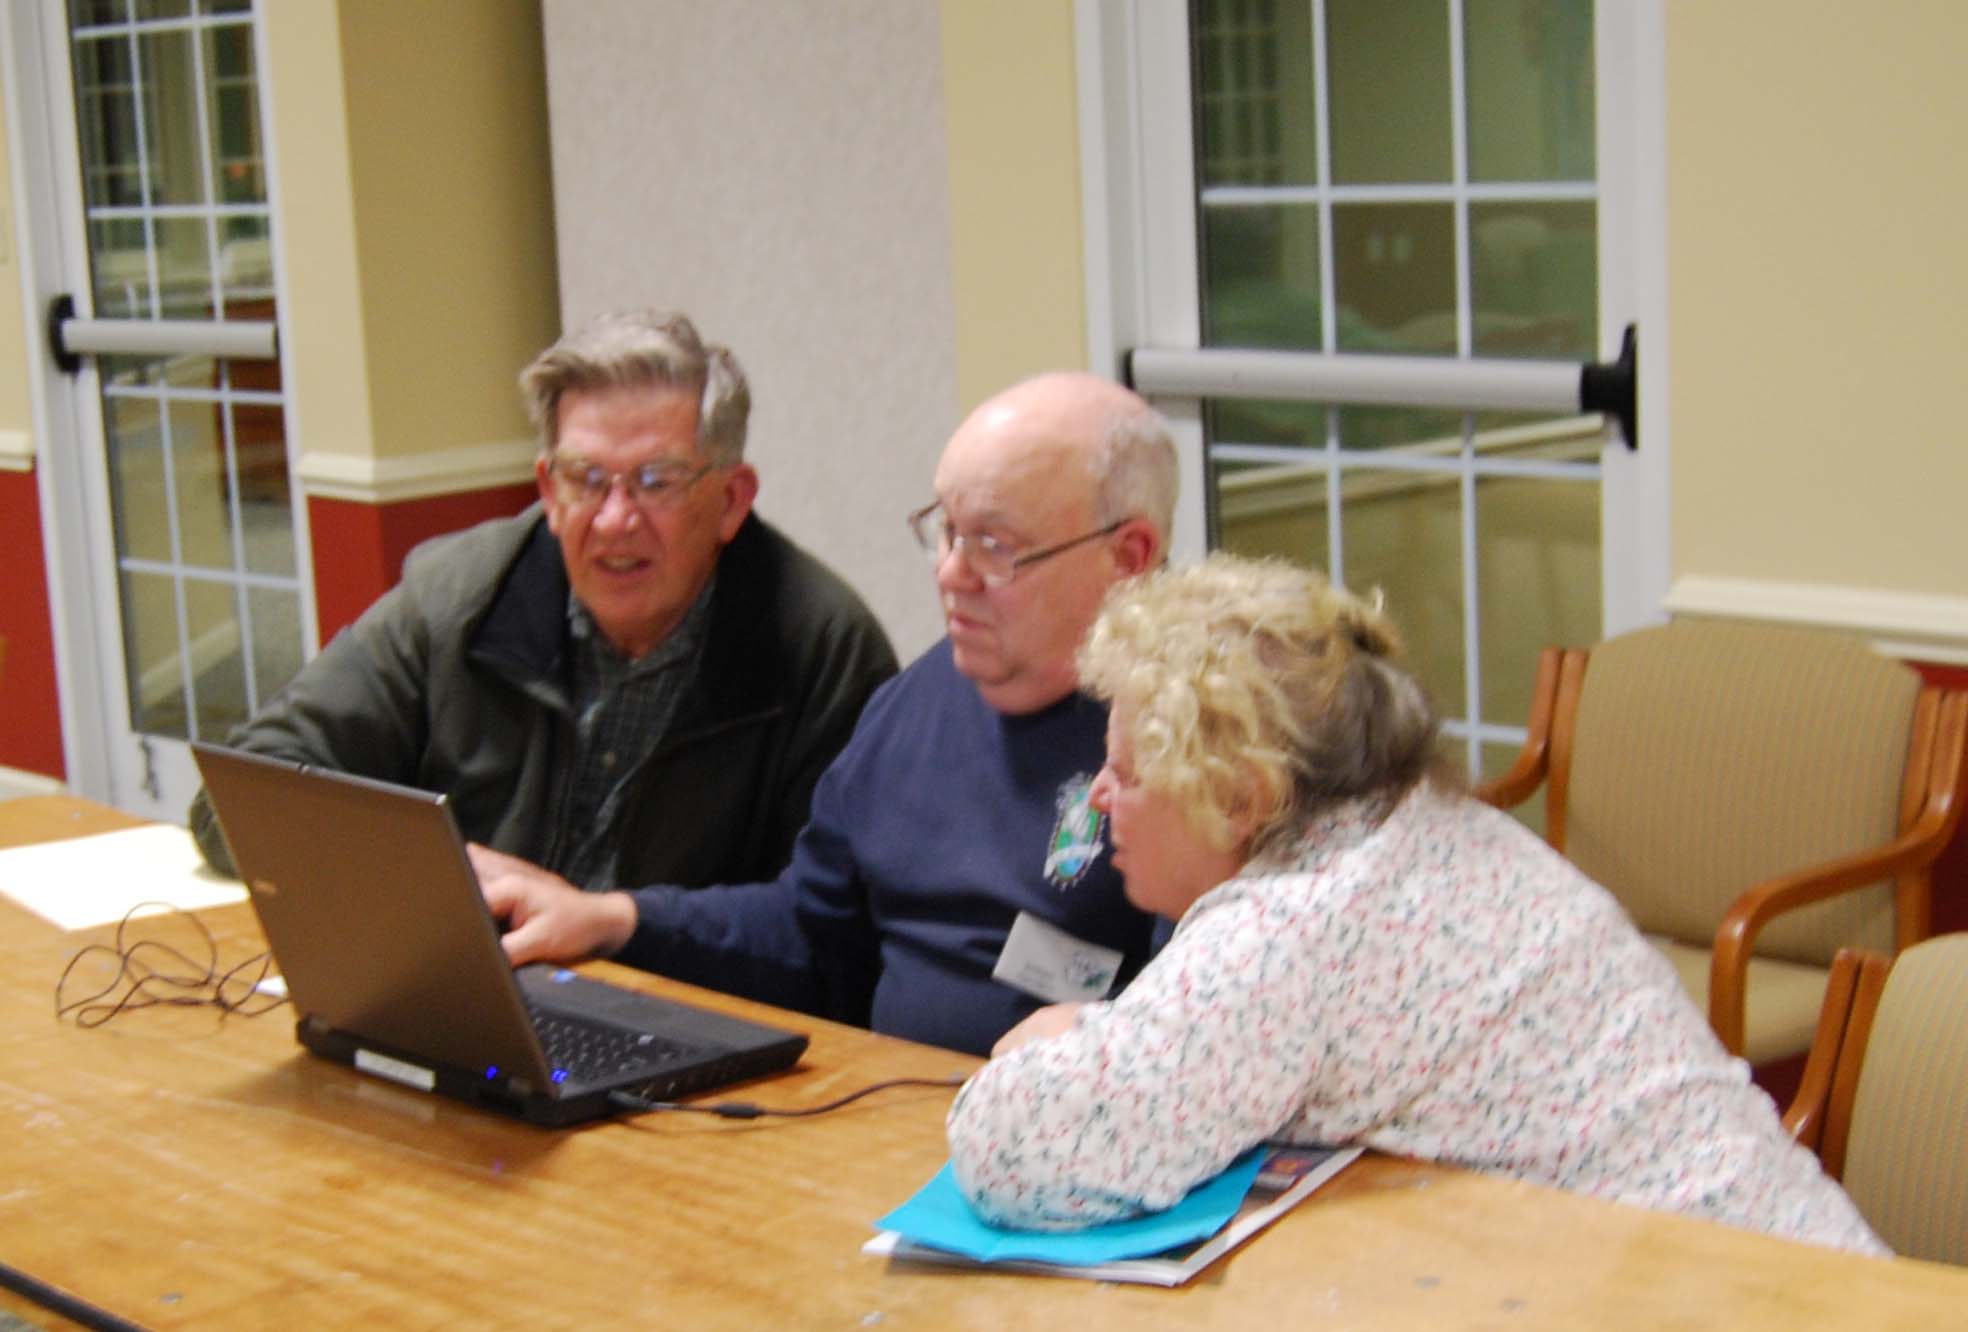 Genealogical Society members search for ancestors using internet sources such as Family Search and Ancestry